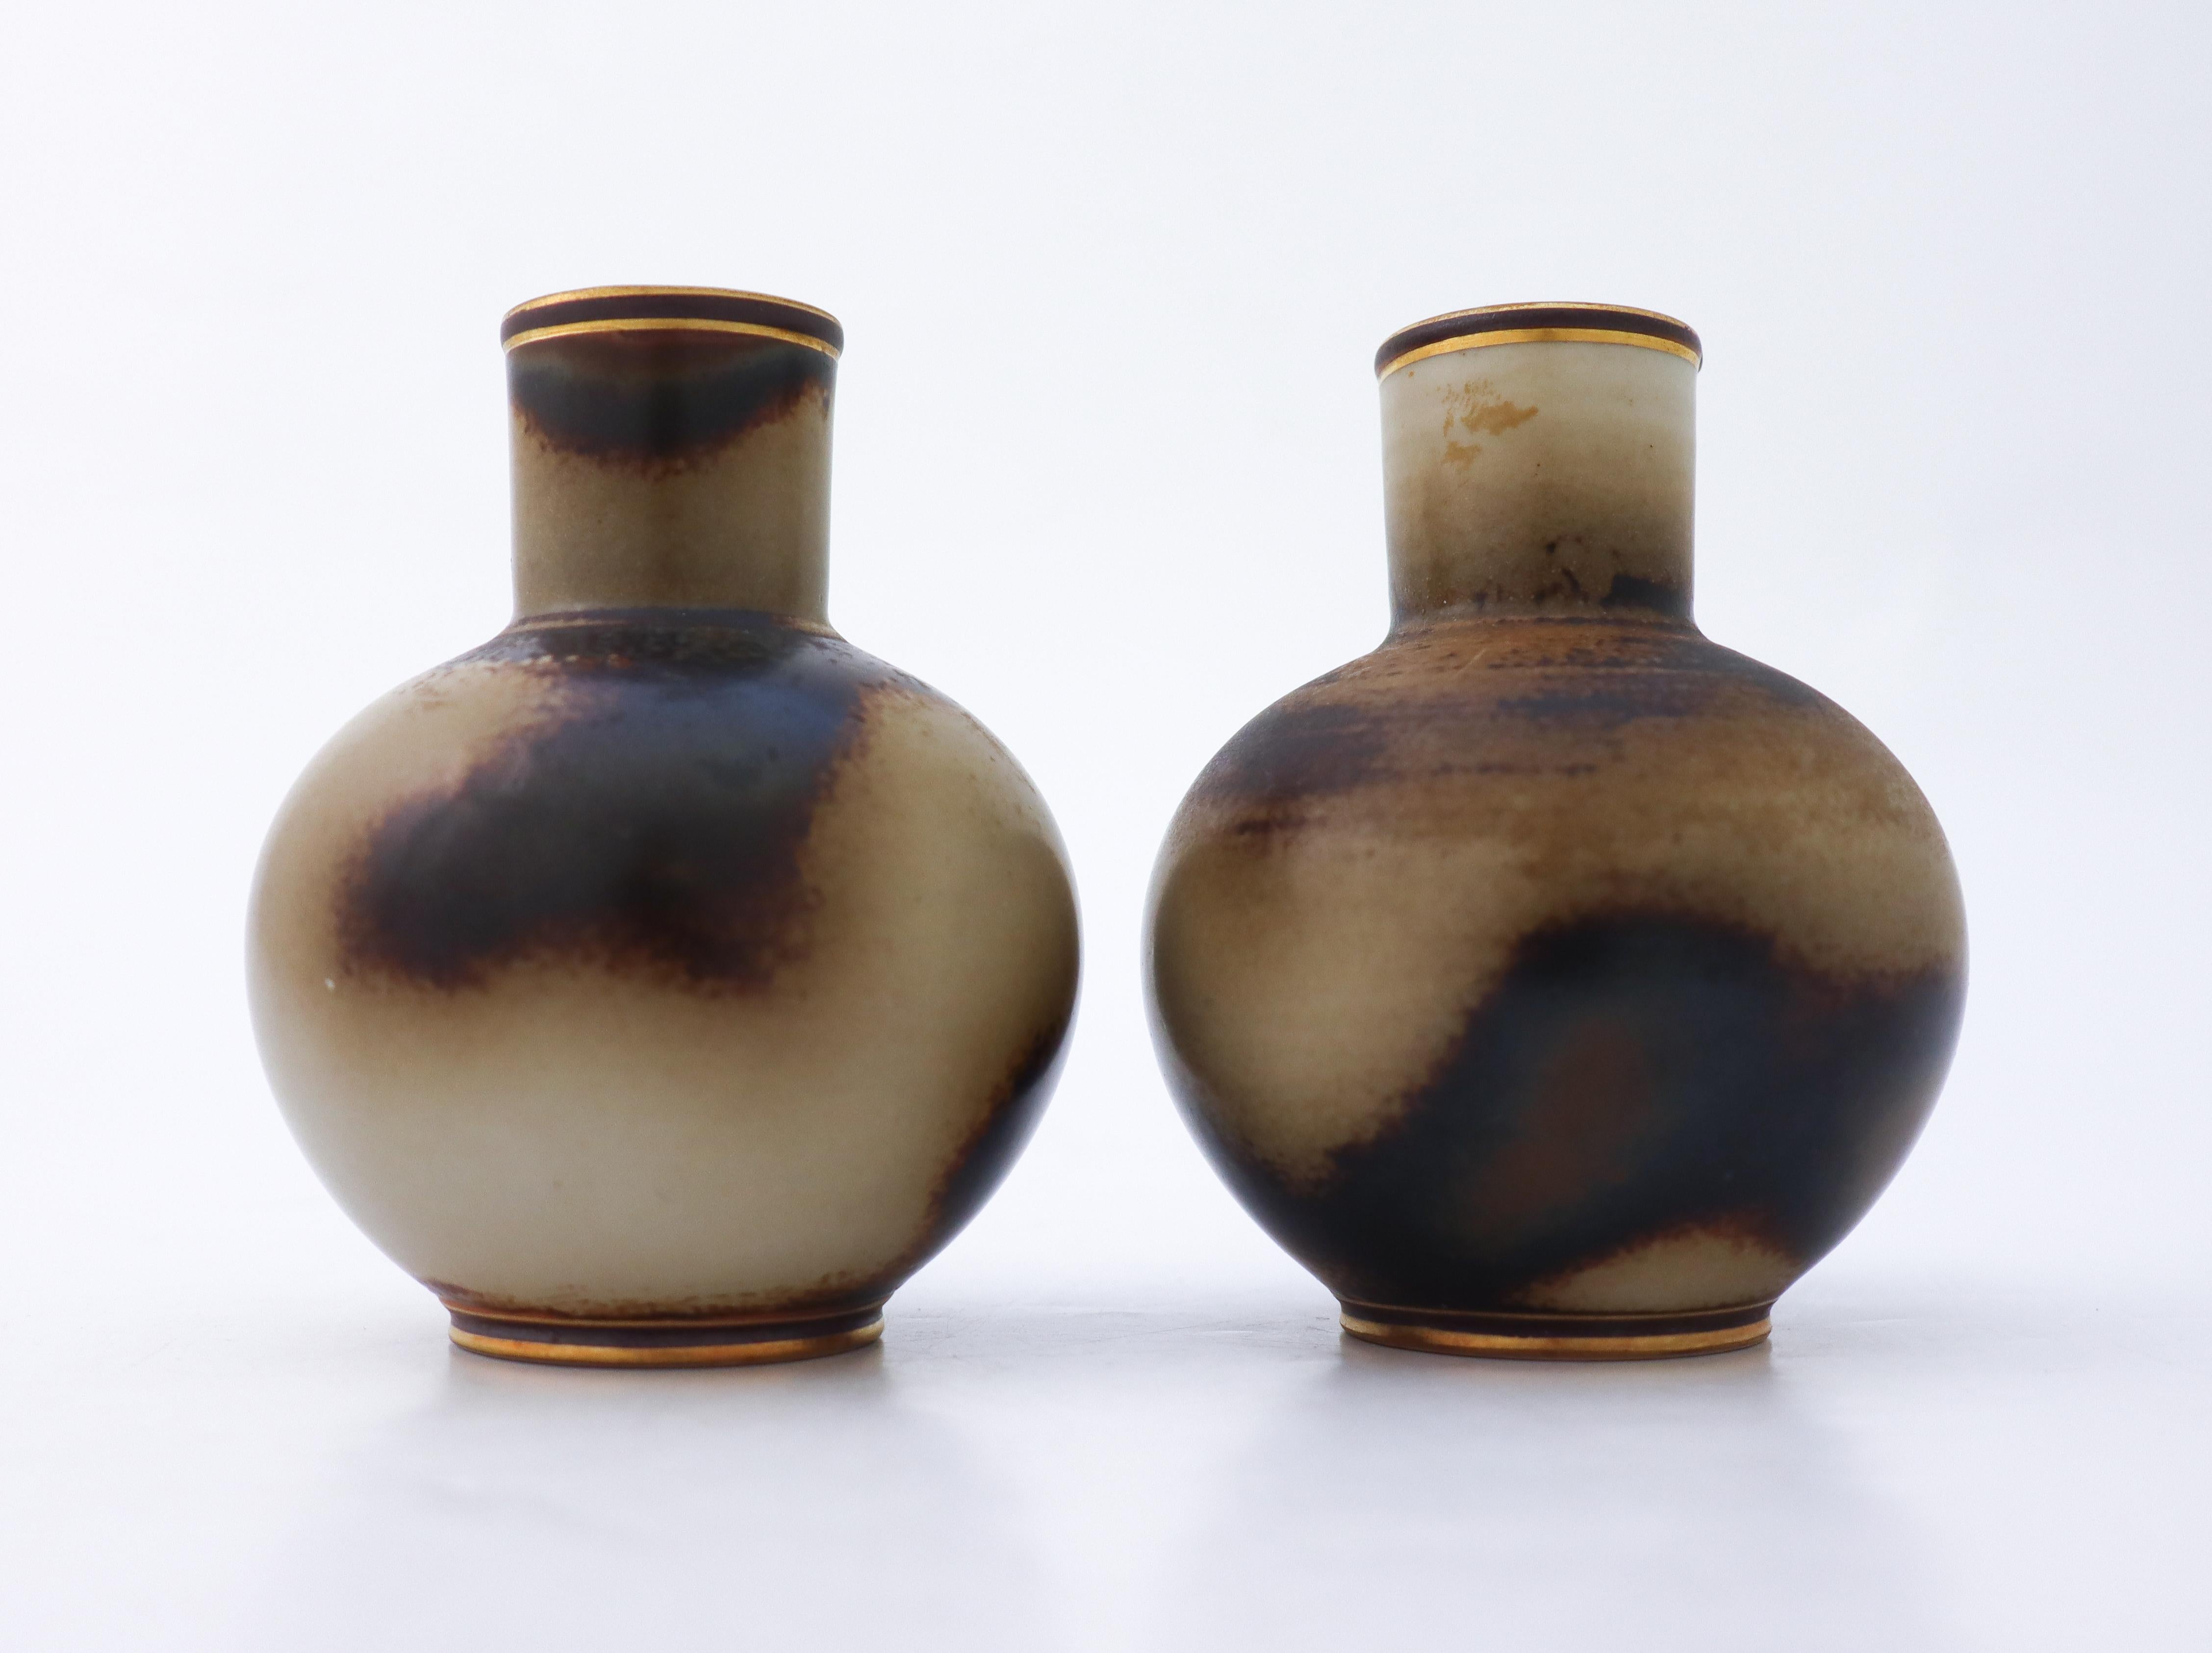 A pair of lovely, brown vases designed by Gunnar Nylund at Rörstrand of model Flambé, they are 10 cm (4